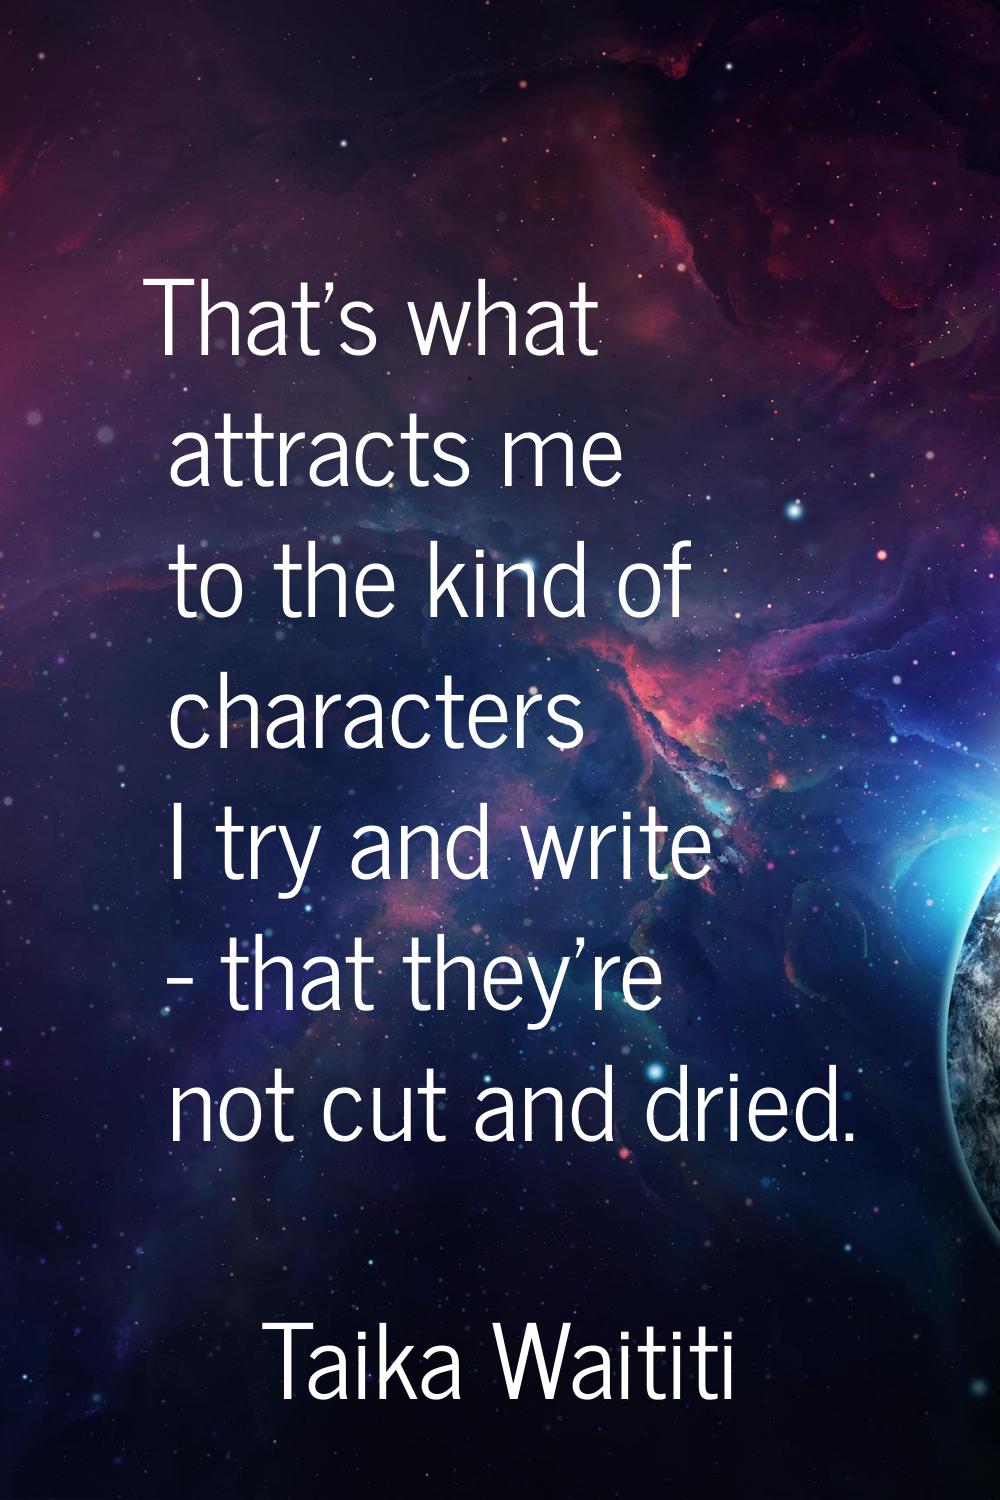 That's what attracts me to the kind of characters I try and write - that they're not cut and dried.